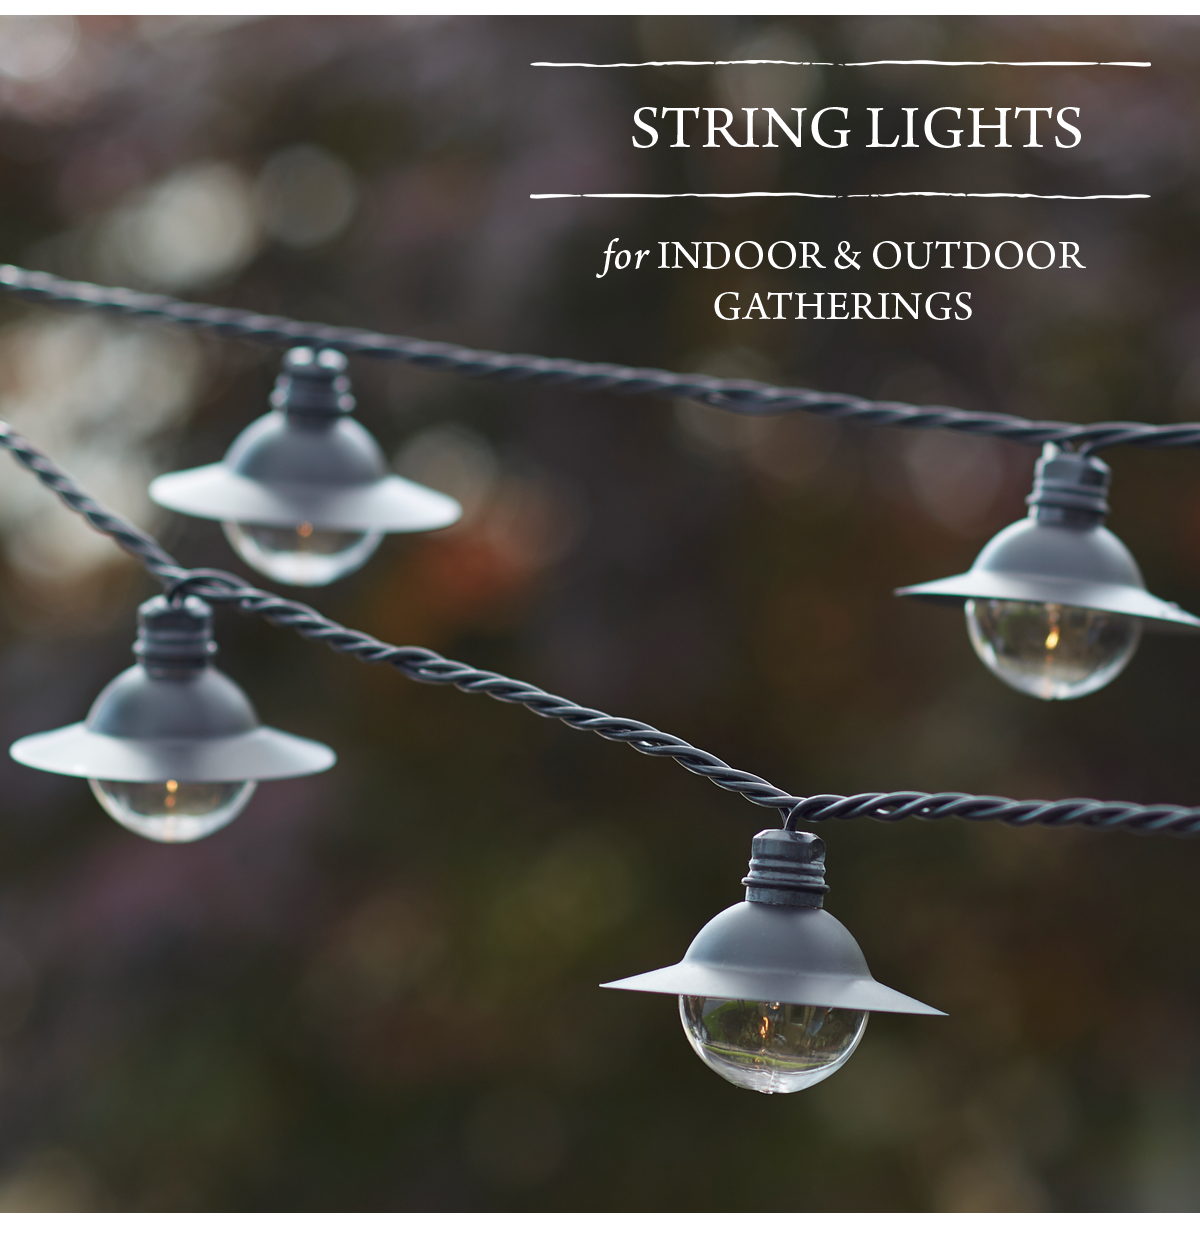 STRING LIGHTS for indoor & outdoor gatherings